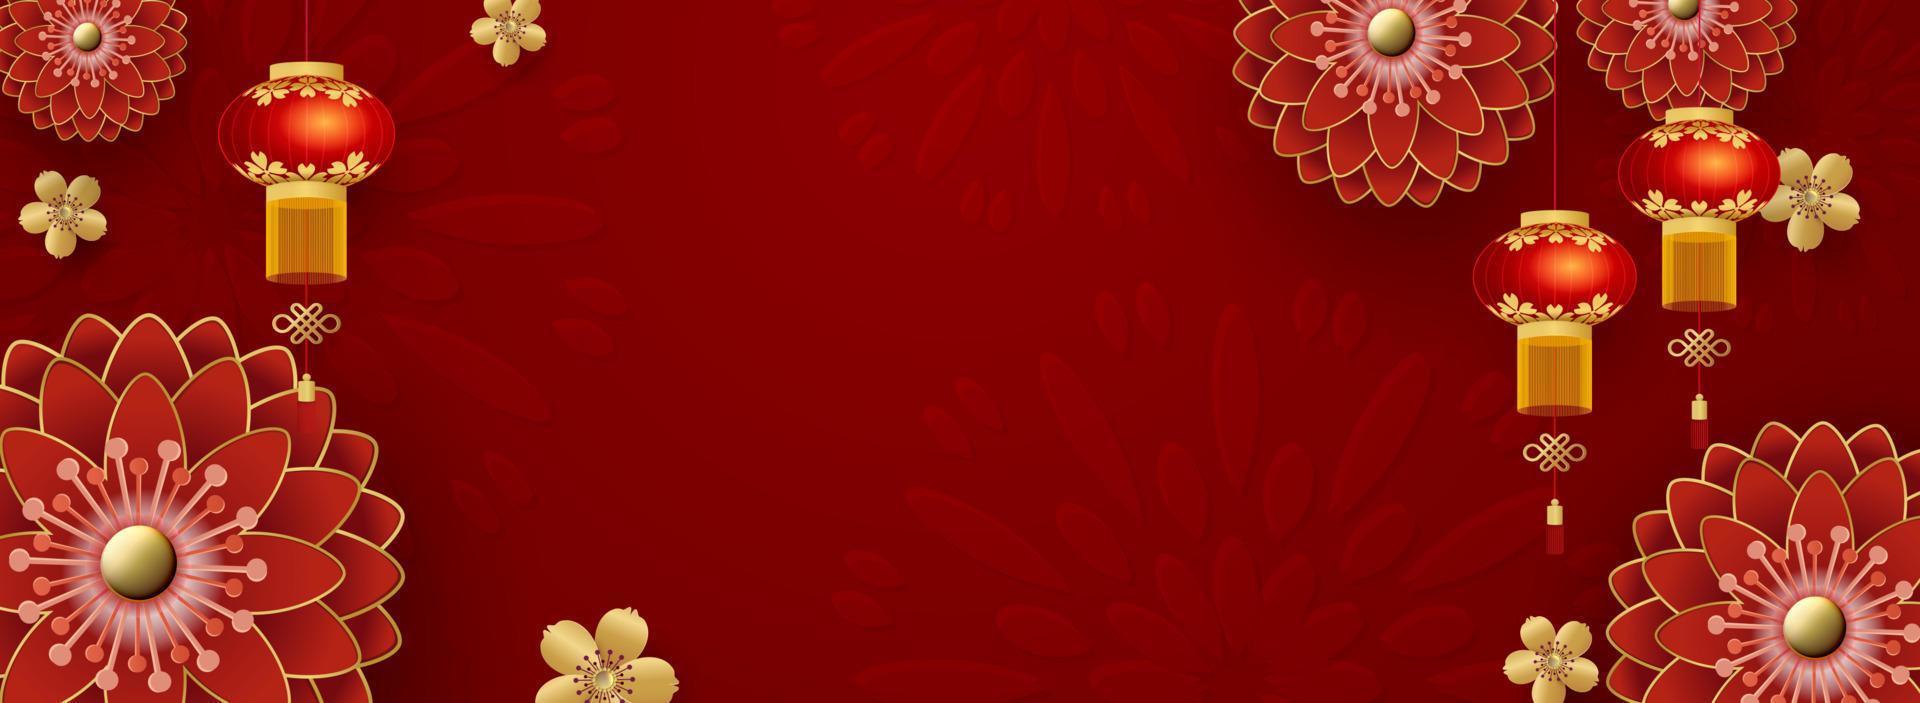 Chinese Greeting Card for 2023 New Year. Red chrysanthemums and golden sakura flowers, clouds and Asian elements on a red background. Vector illustration